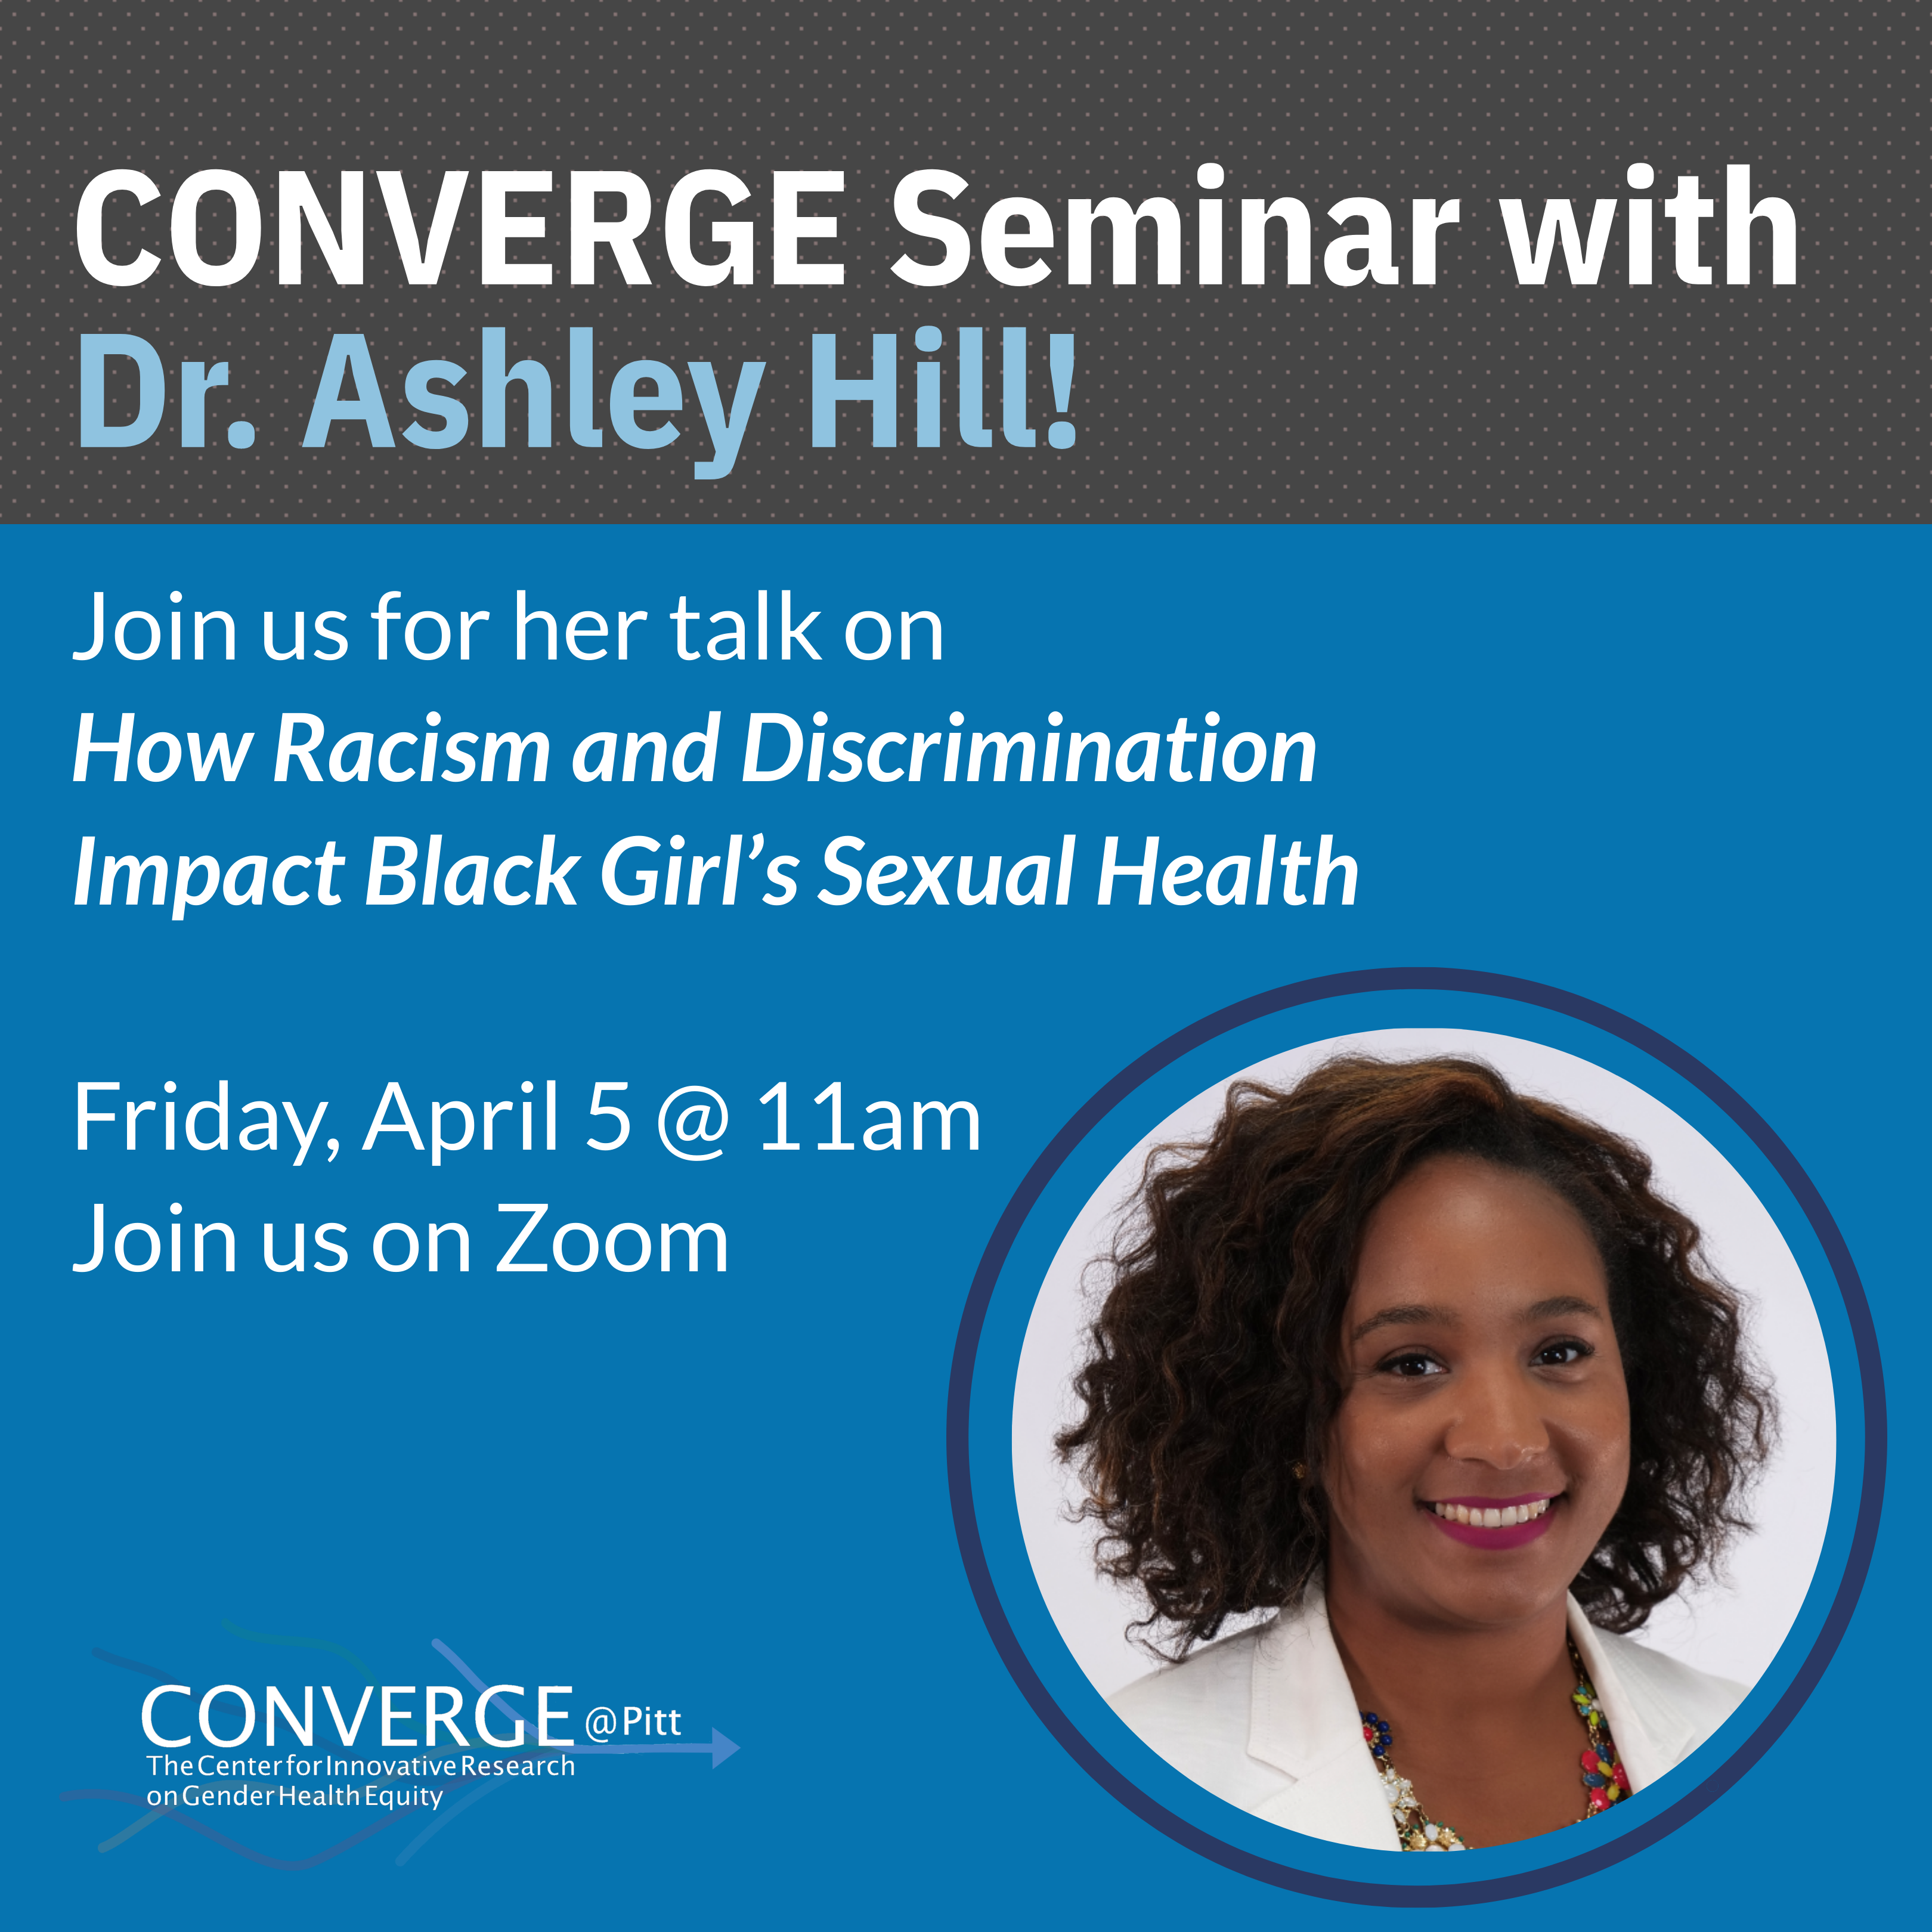 CONVERGE Seminar with Dr. Ashley Hill, How Racism and Discrimination Impact Black Girl’s Sexual Health